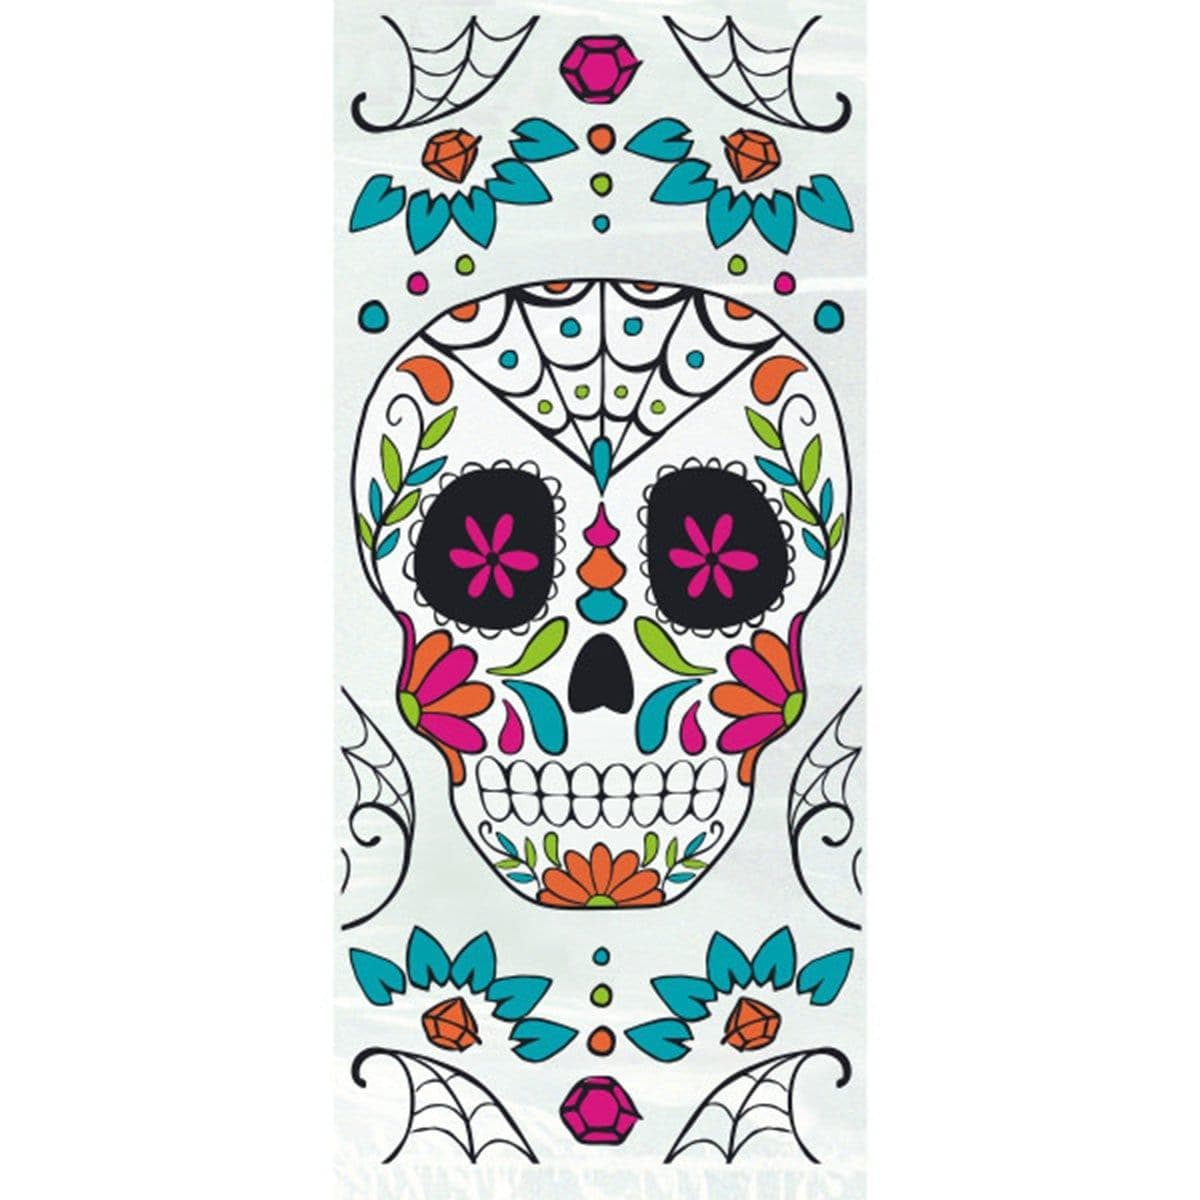 Buy Halloween Day of the Dead Sugar Skulls cello favor bags, 20 per package sold at Party Expert